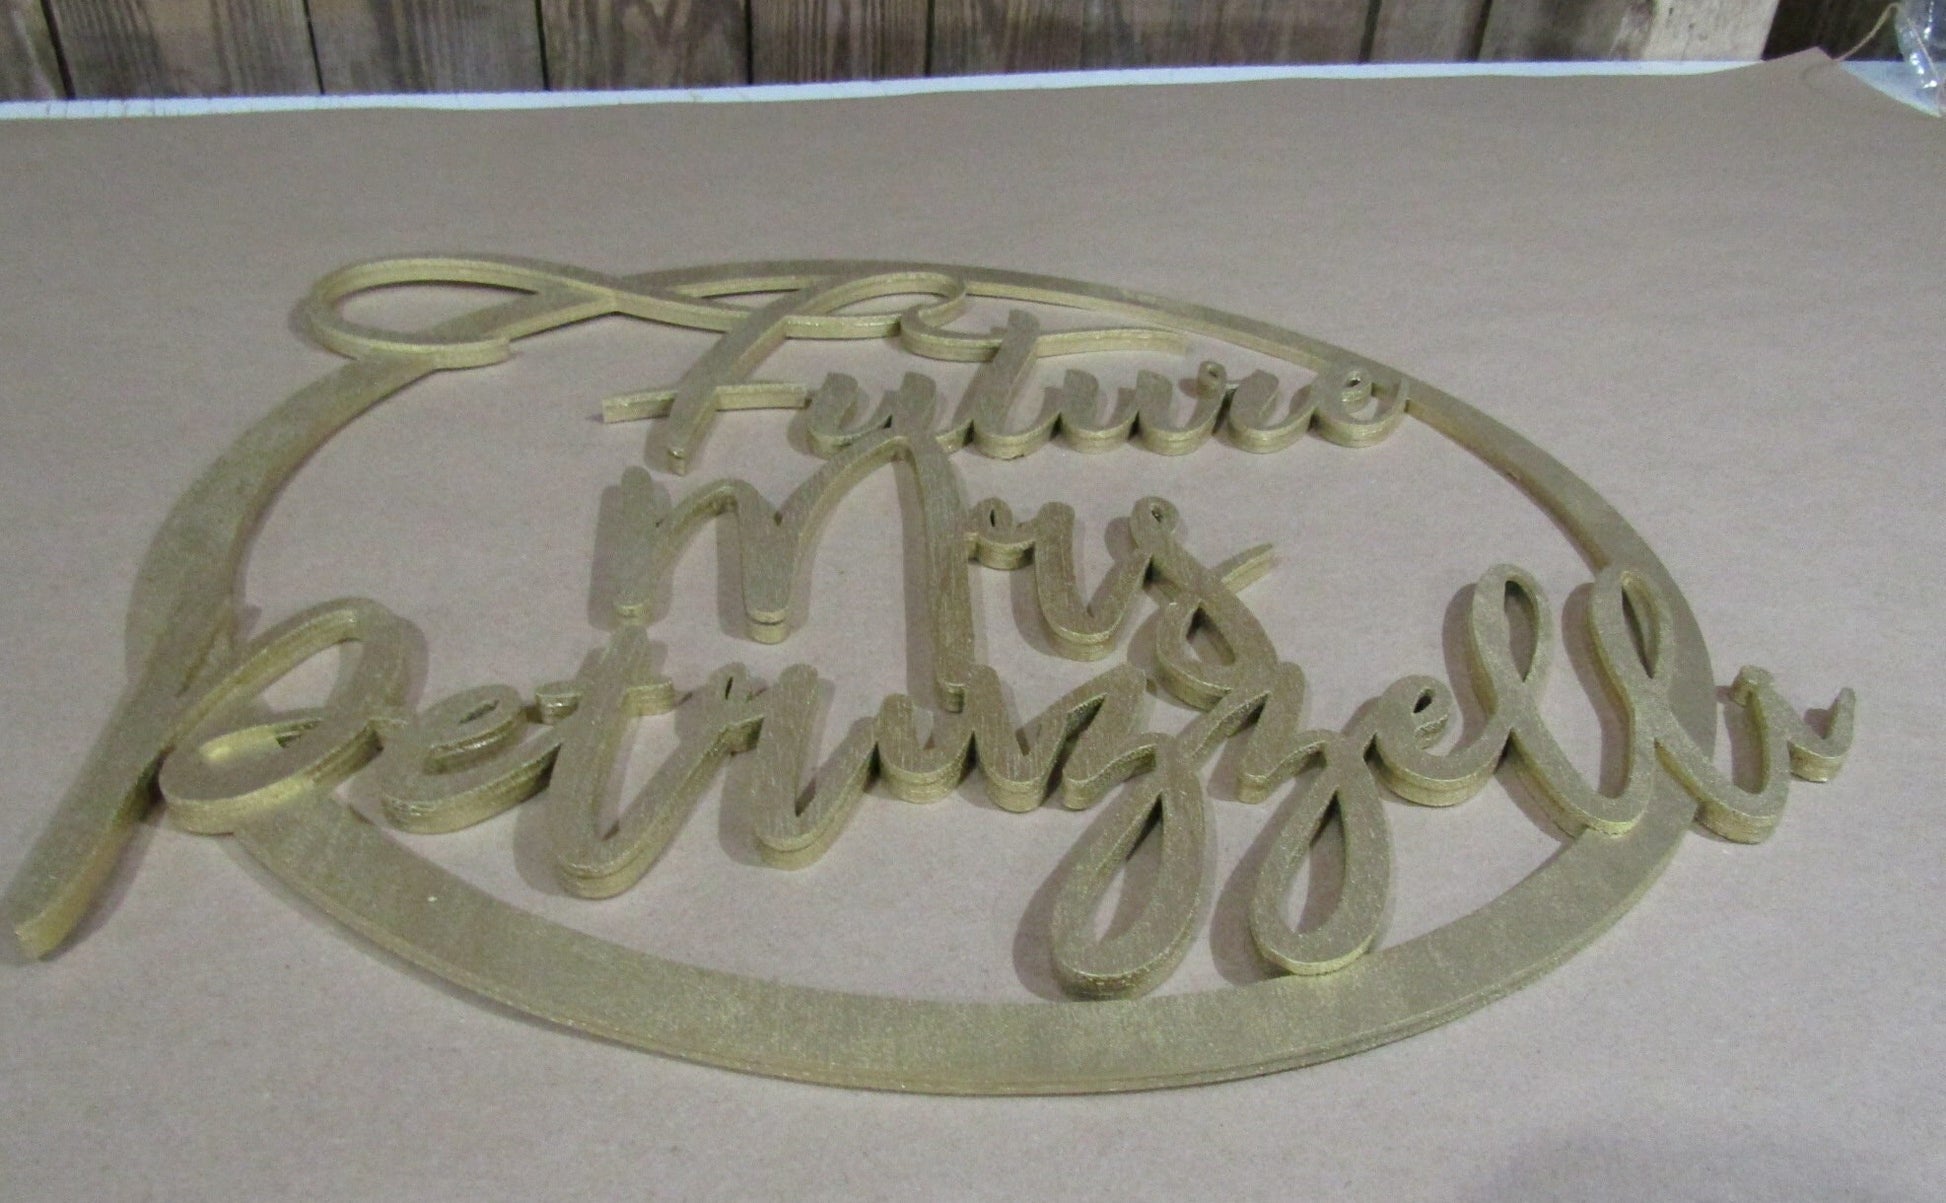 Future Mrs Hoop Wreath Bride to be Wedding Bridal Shower Prop Wooden Cut Out Sign Large 3D Wood Your Words Custom Words Laser Party Decor